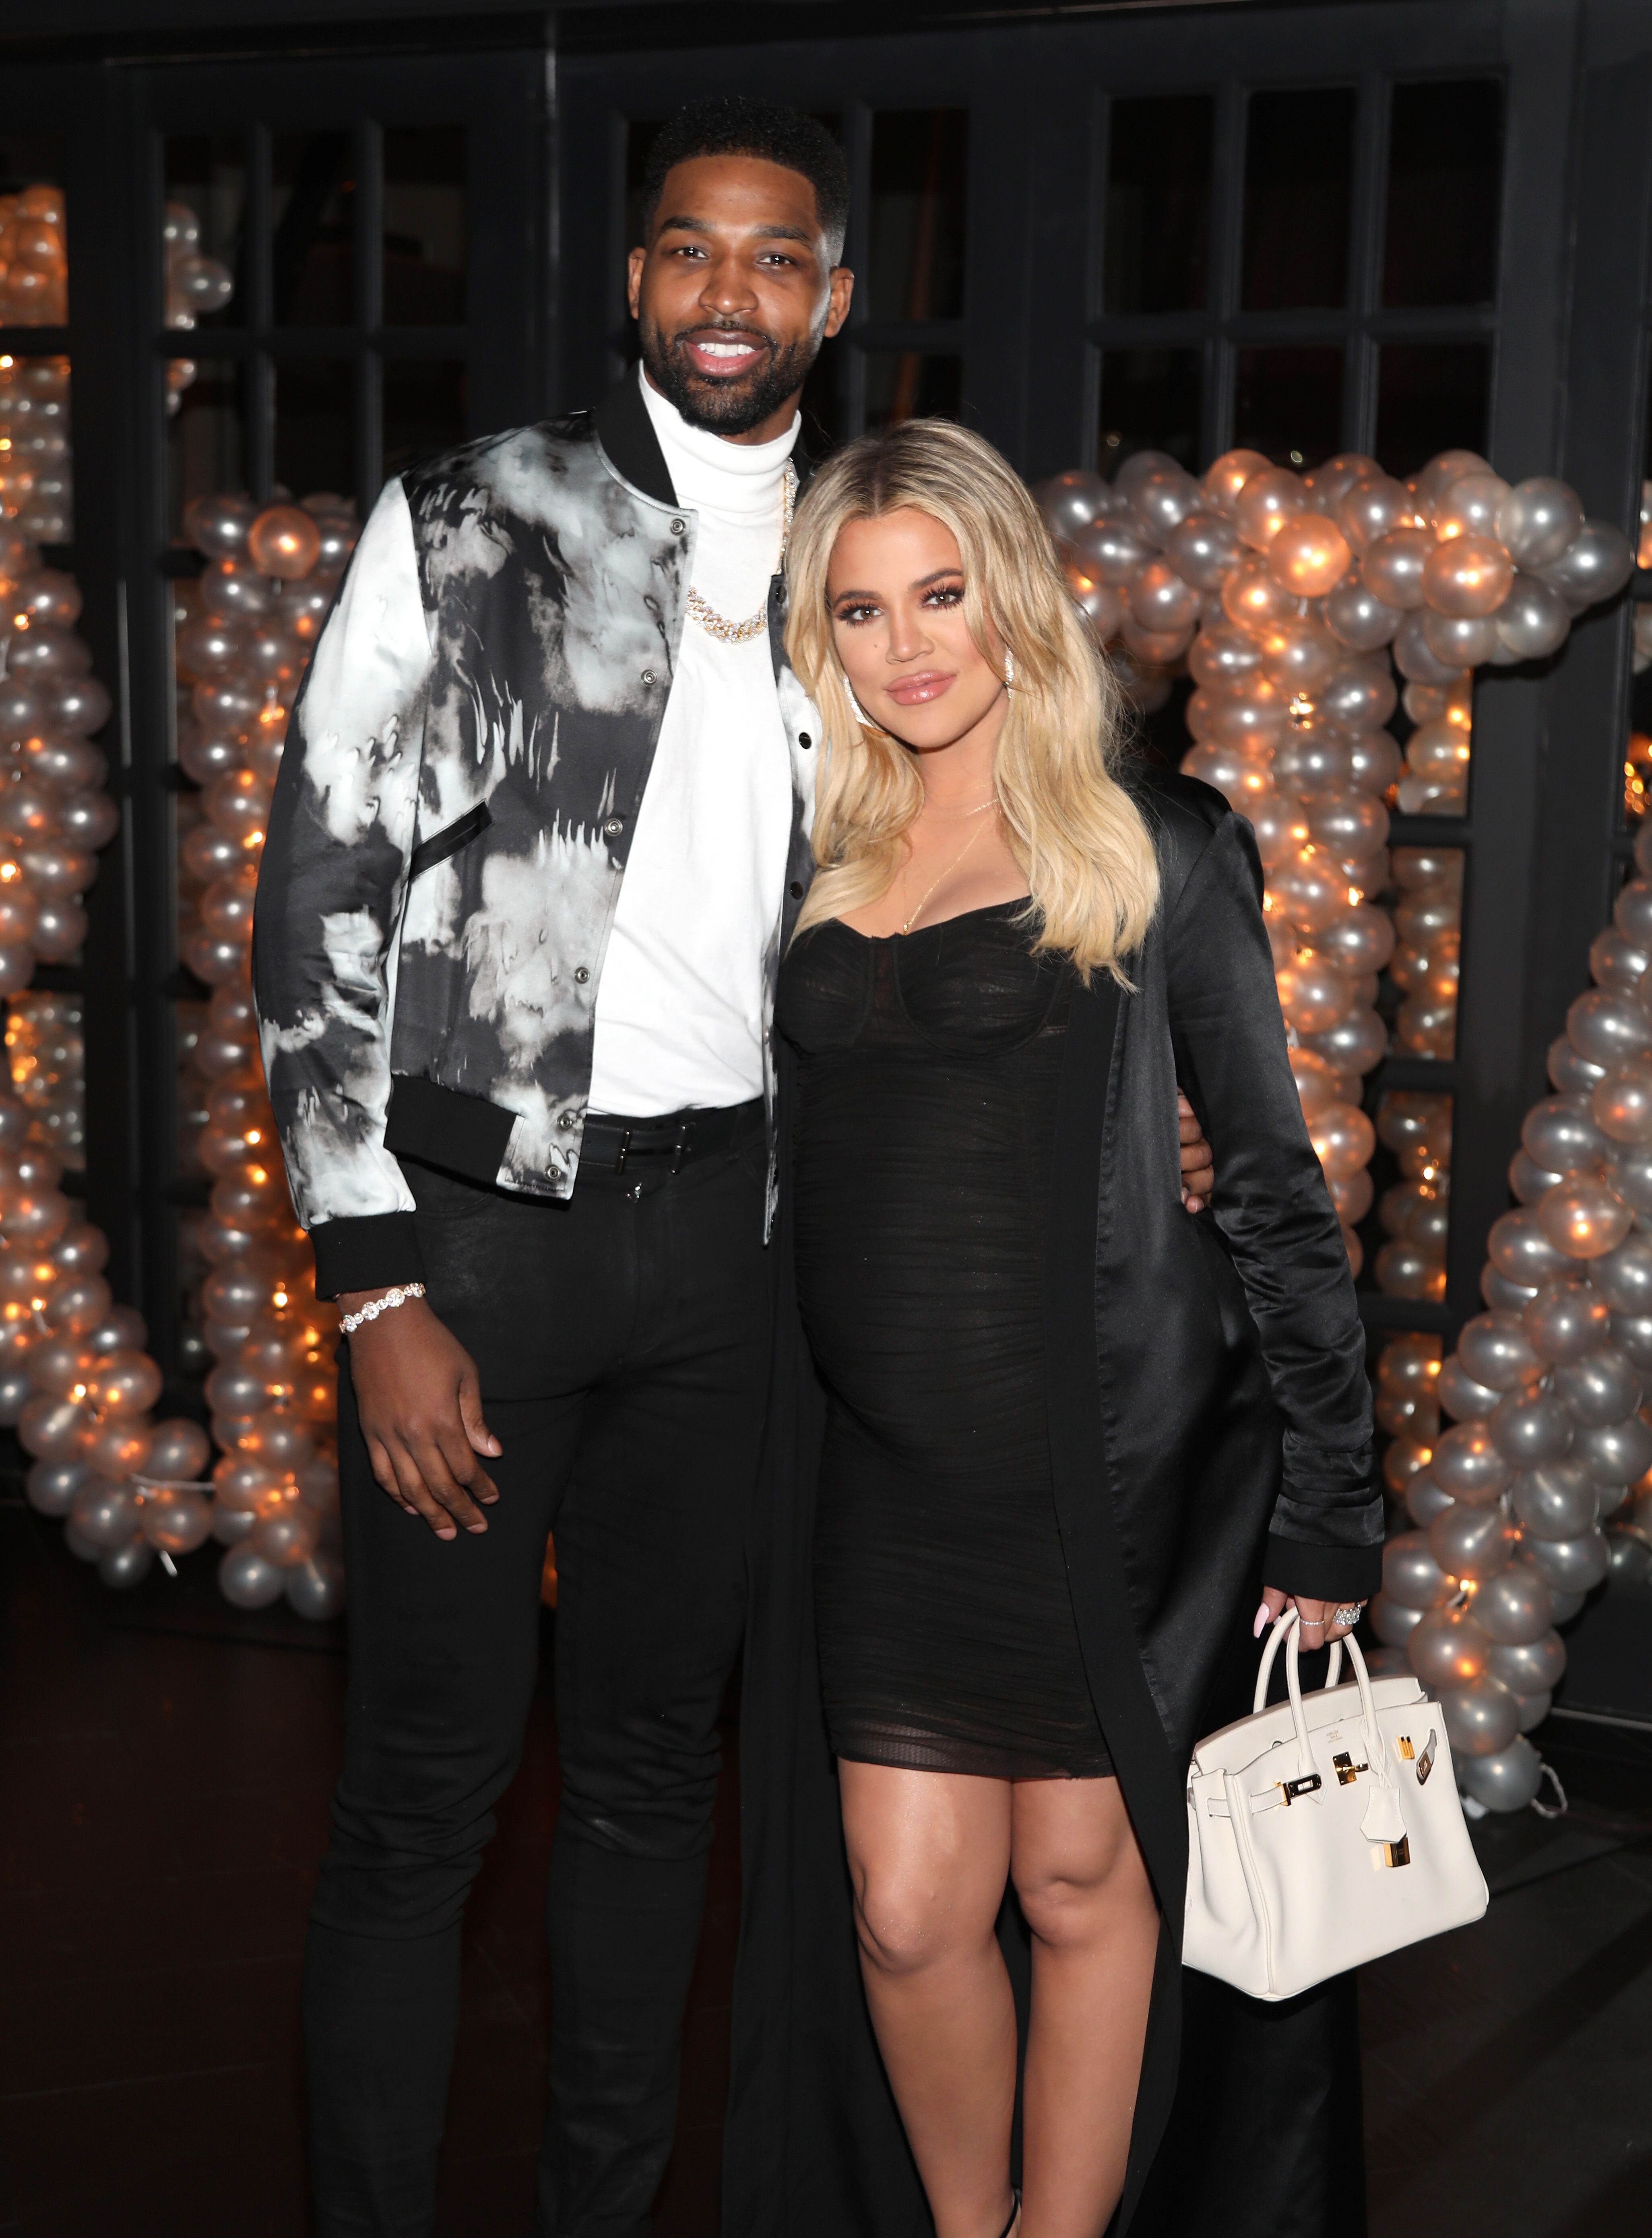 Tristan Thompson and Khloe Kardashian celebrate his birthday at Beauty & Essex on March 10, 2018 | Photo: Getty Images